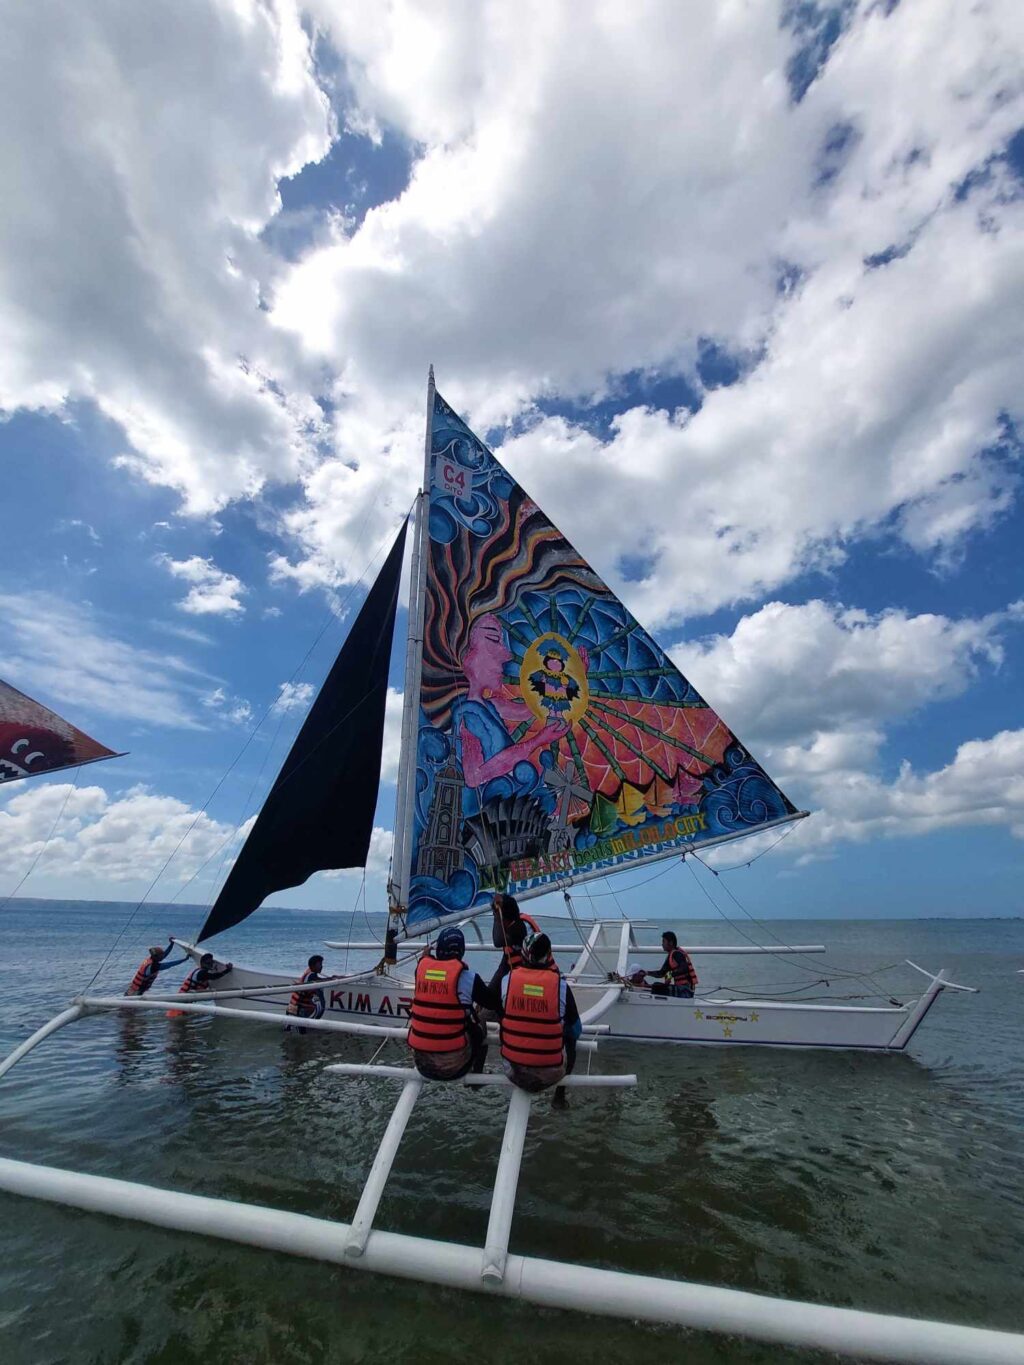 Boat as a metaphor for our maritime culture. Photo shows a participant in Paraw Regatta.